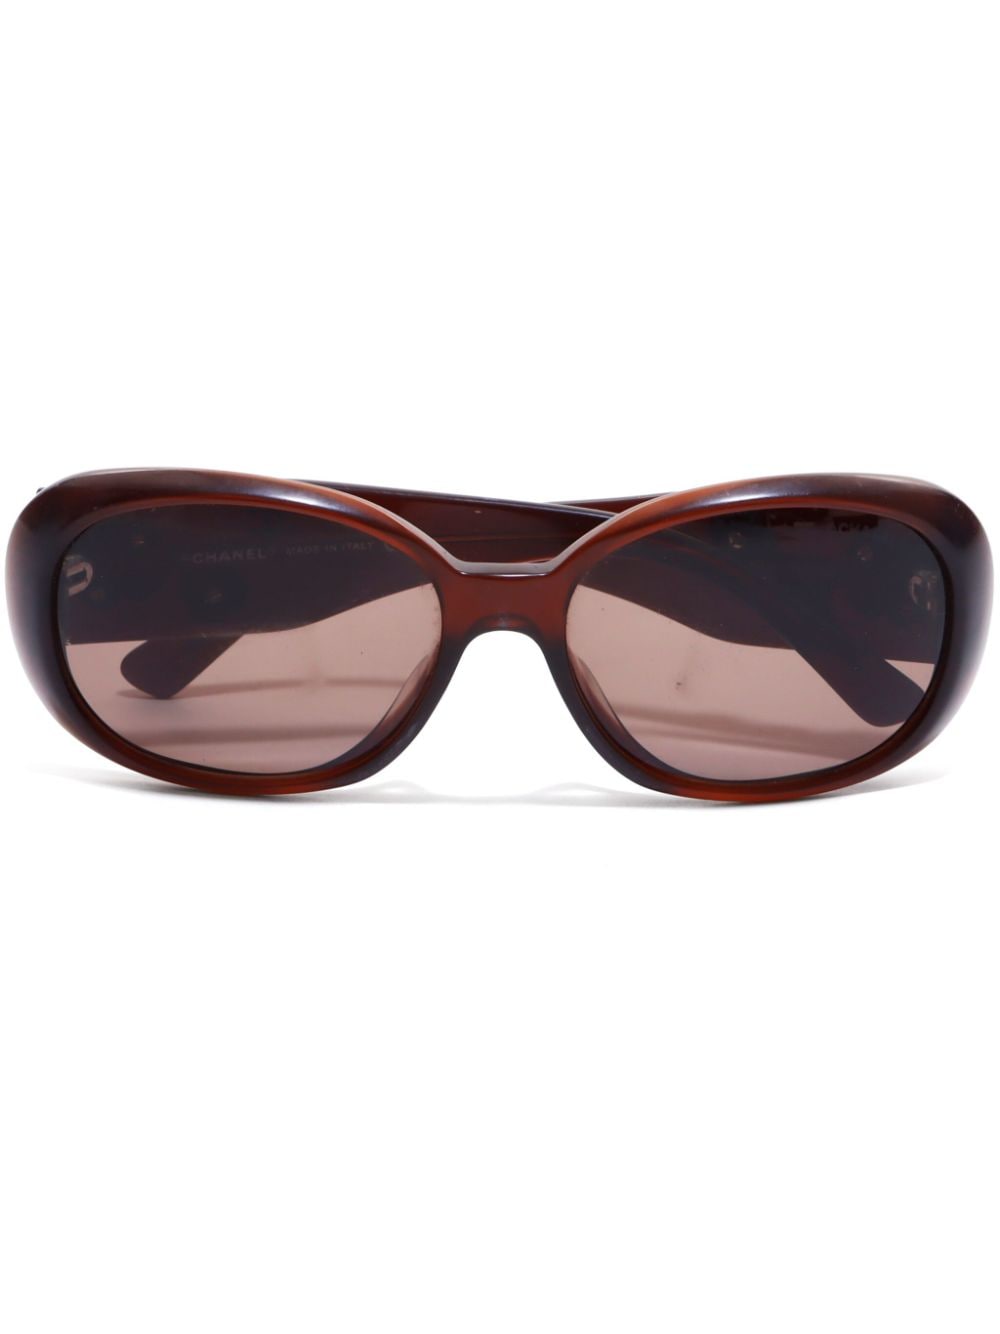 CHANEL Pre-Owned 2000 Camellia oval-frame sunglasses - Brown